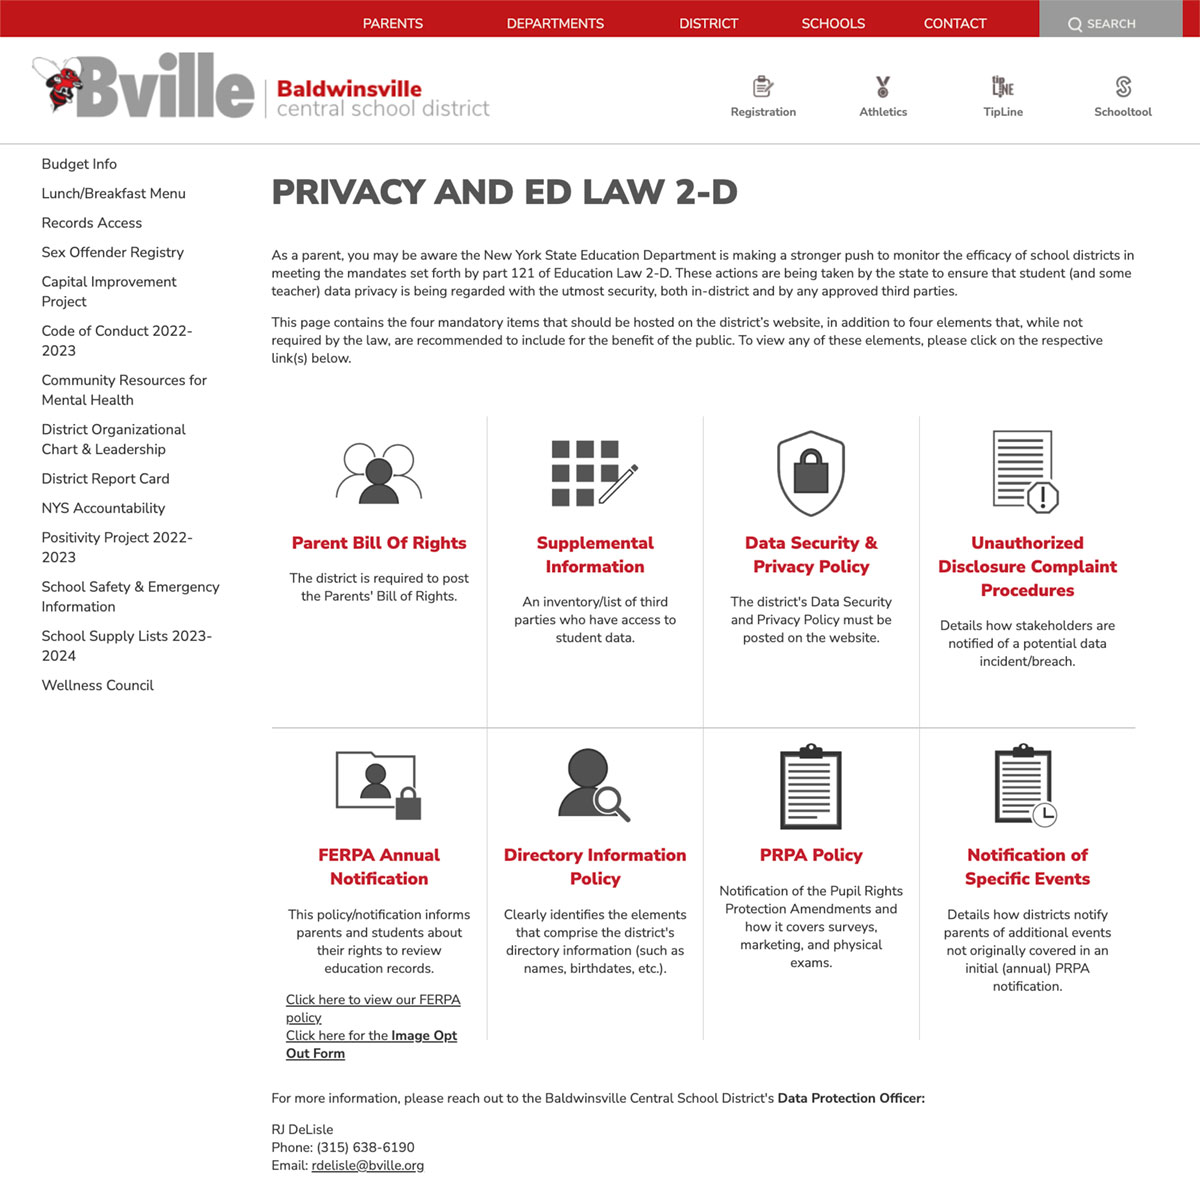 example of Baldwinsville School District Privacy and Ed Law 2-D page